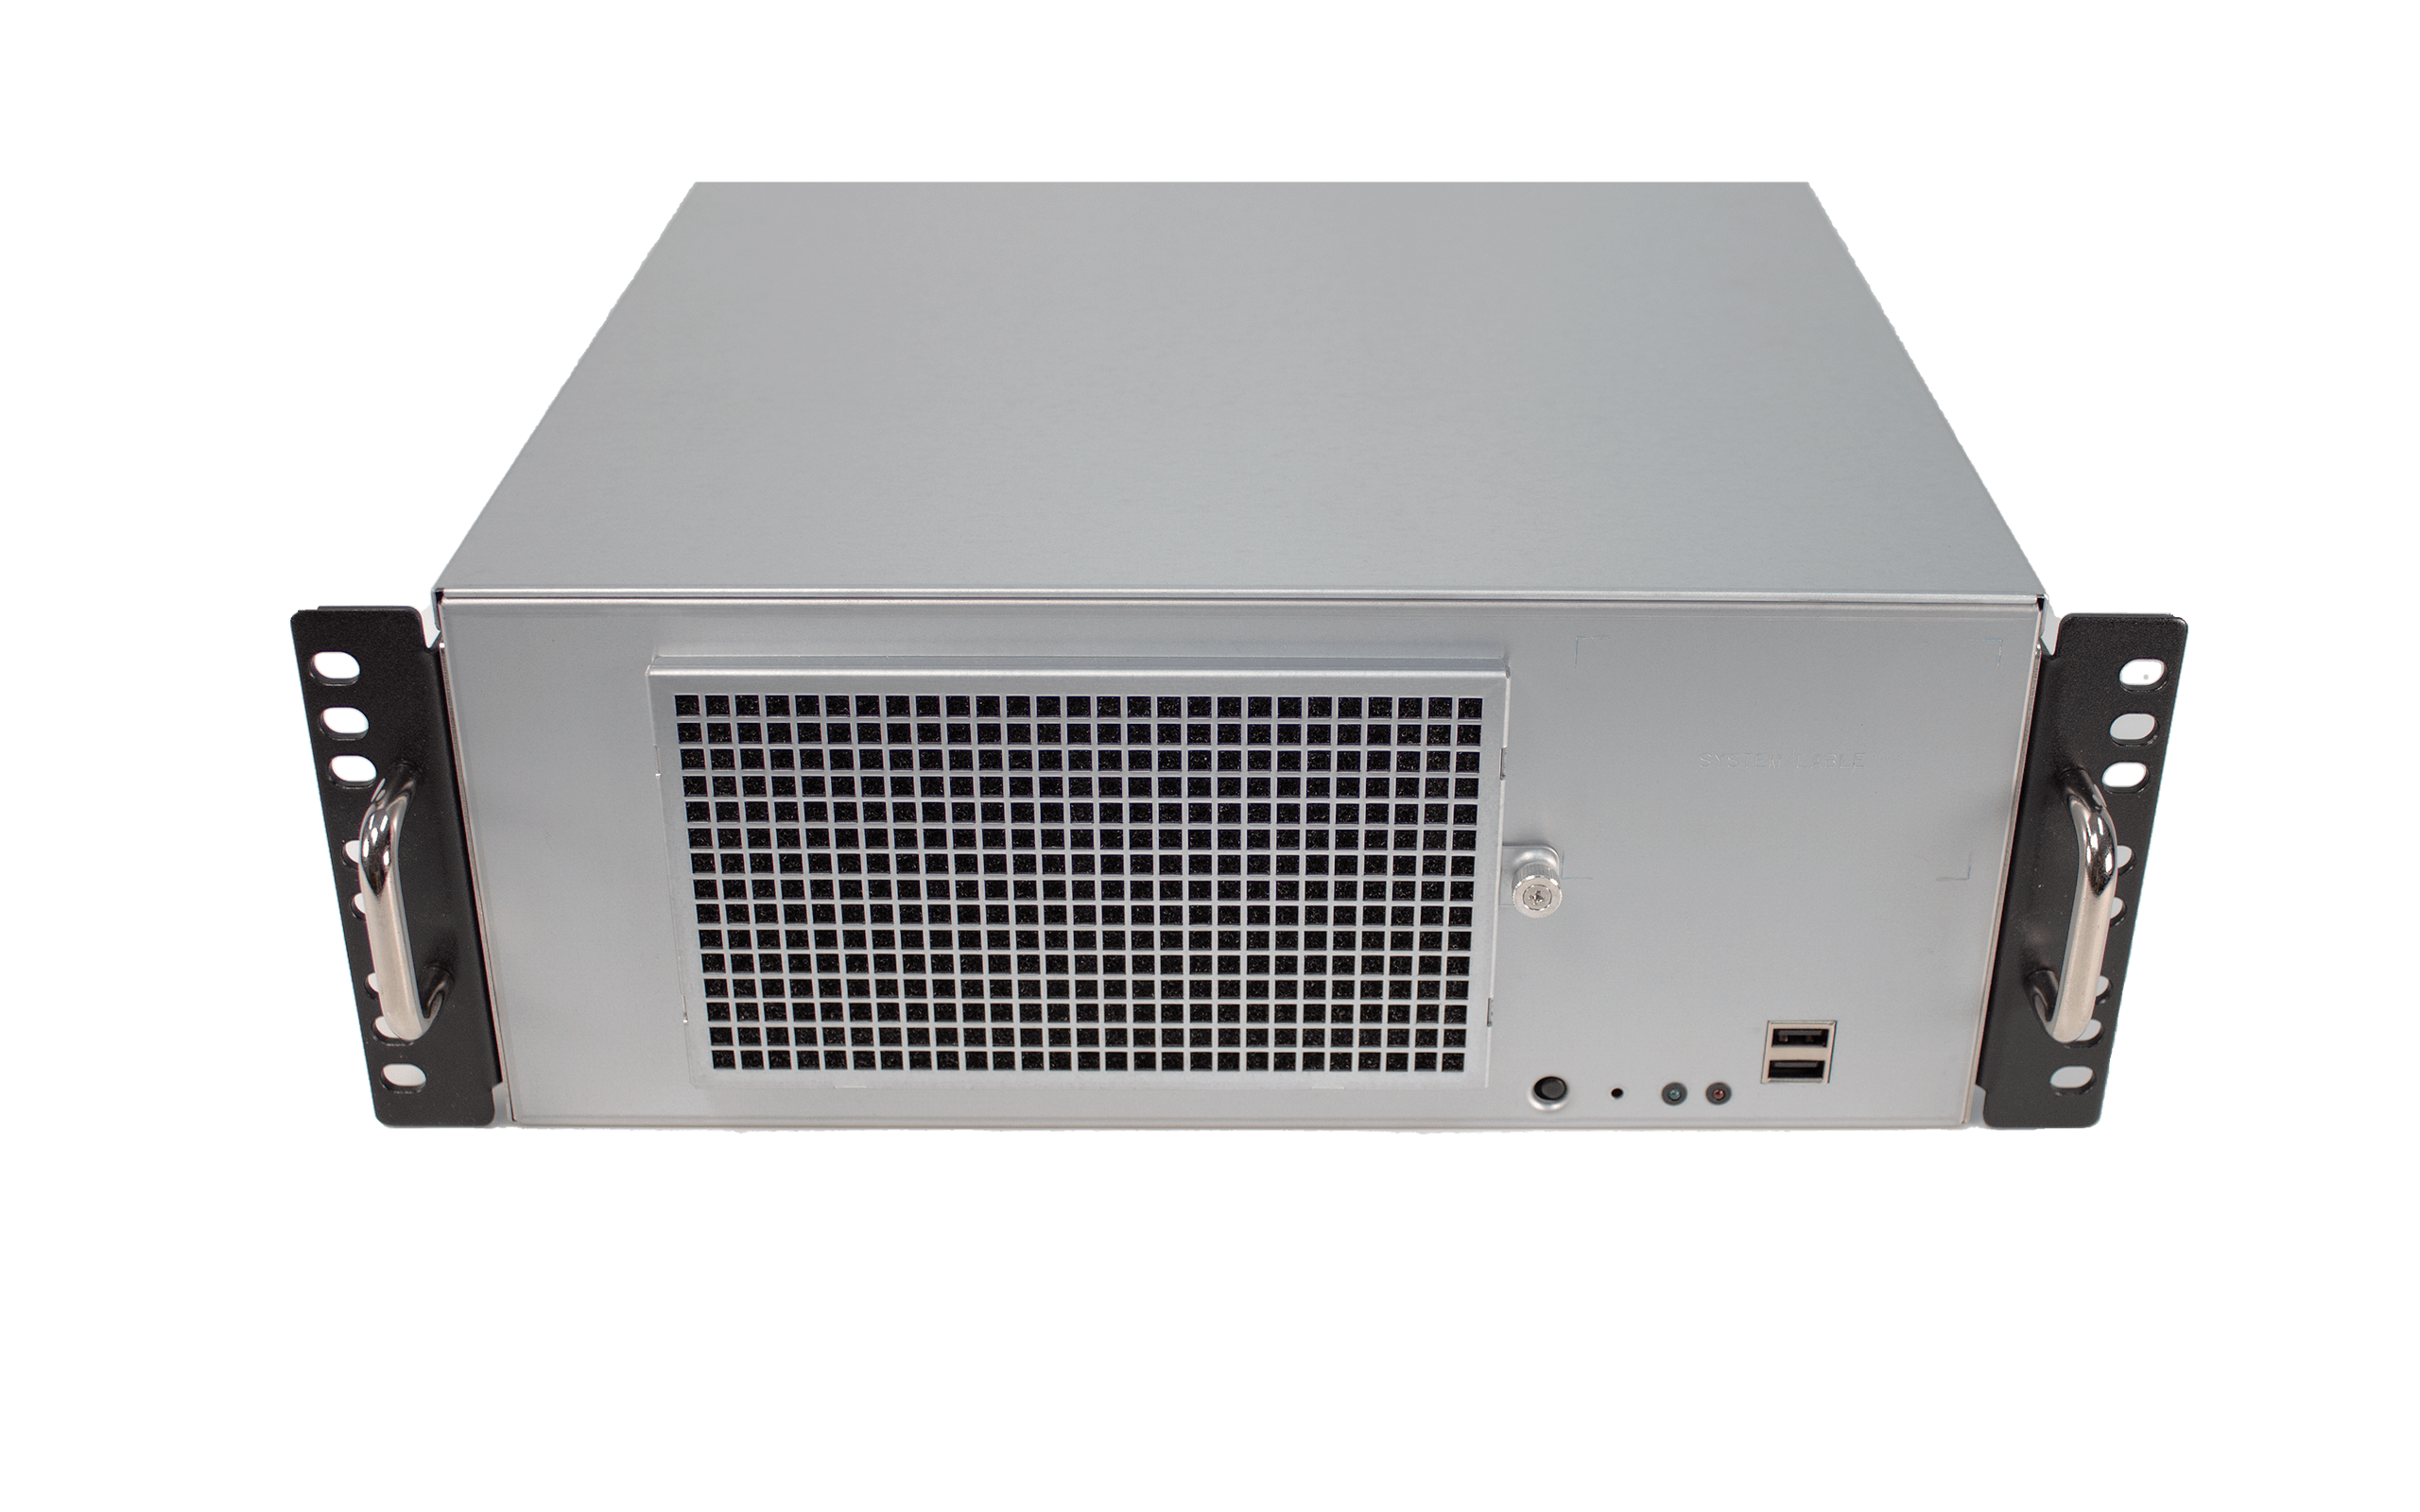 KCO-3000-CFL Industrial Computer with 3U Certification-Ready,  9th Gen Intel® Core® Processor and Q370 PCH, 1x PCIe x16 Low-Profile